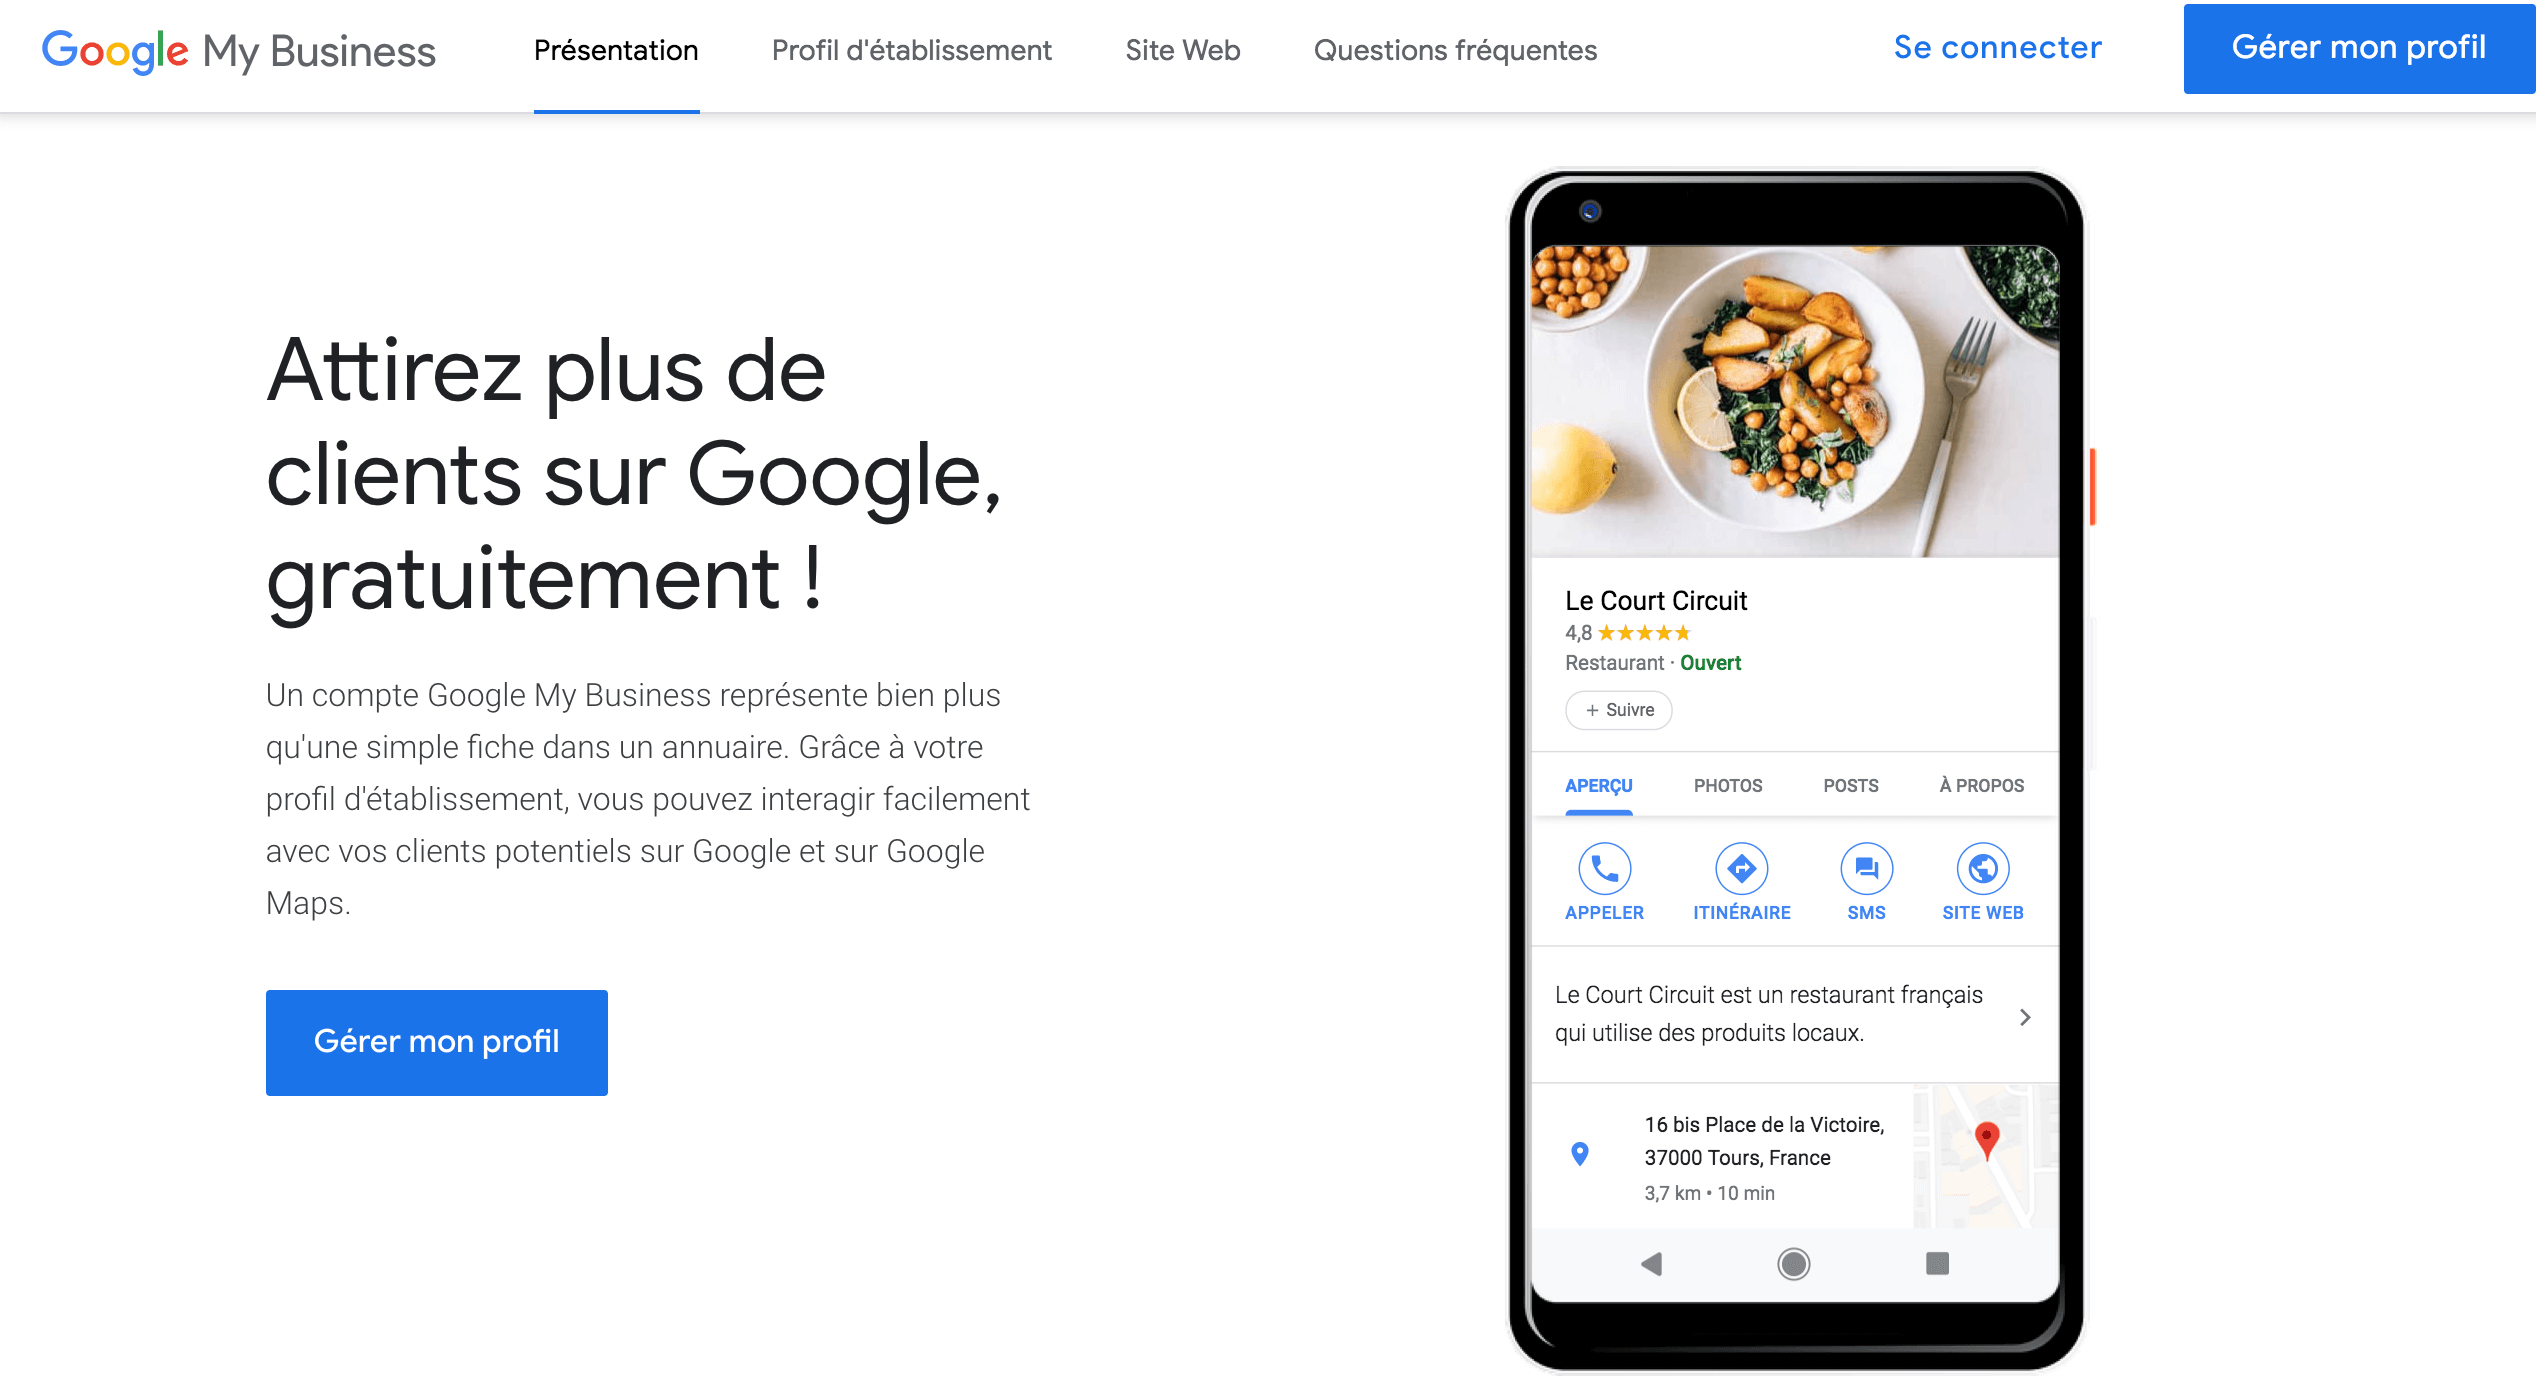 Compte Google my Business